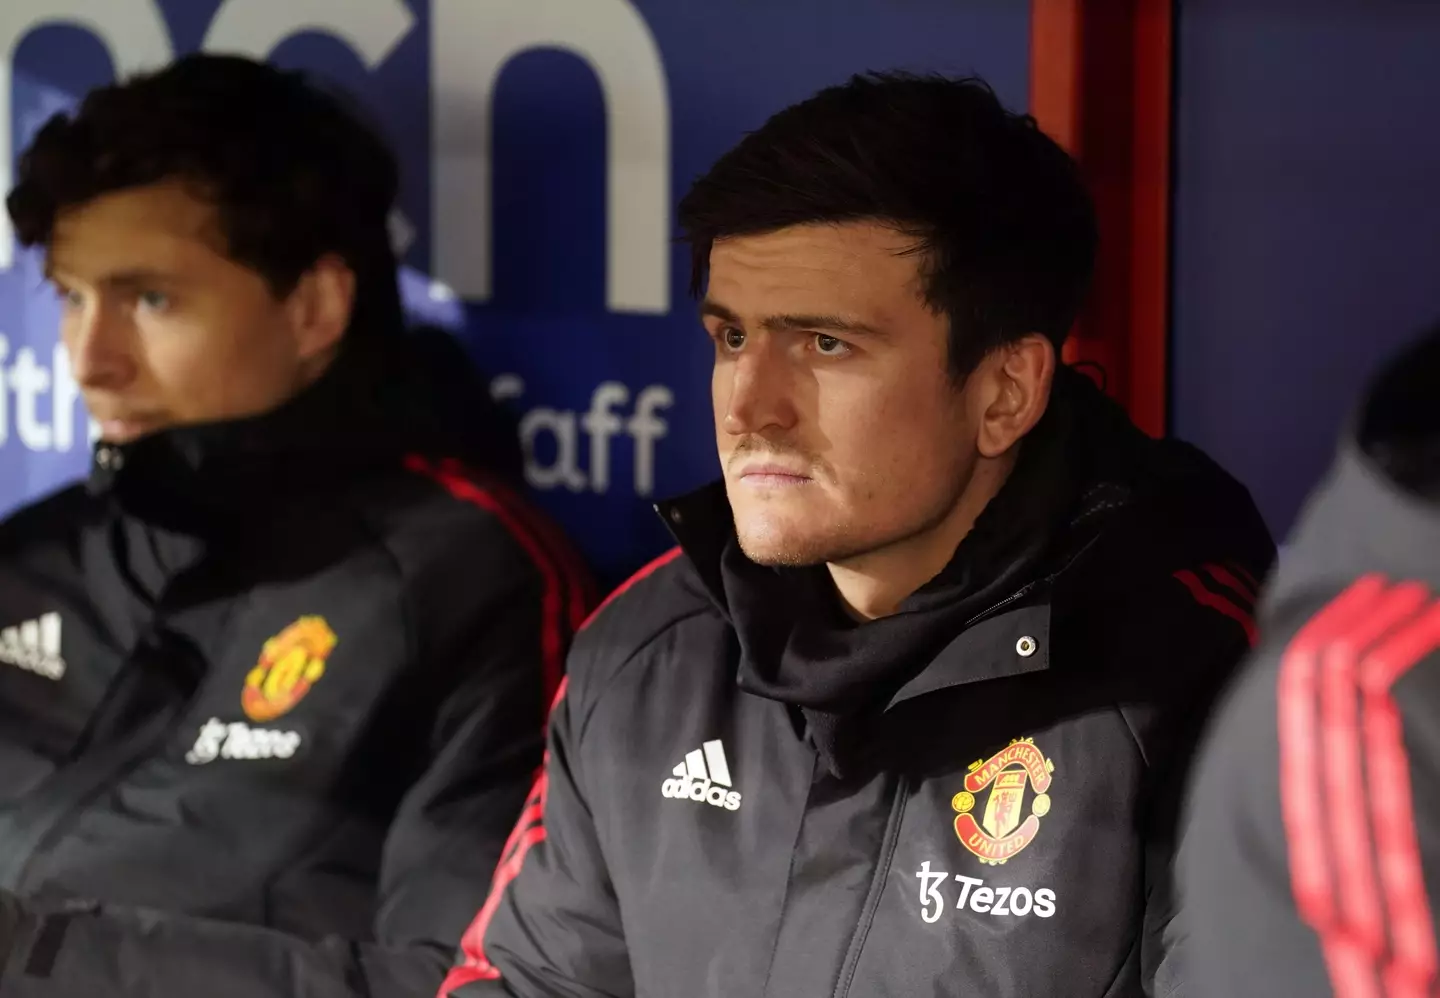 Maguire has been linked with a move away from Old Trafford. (Image